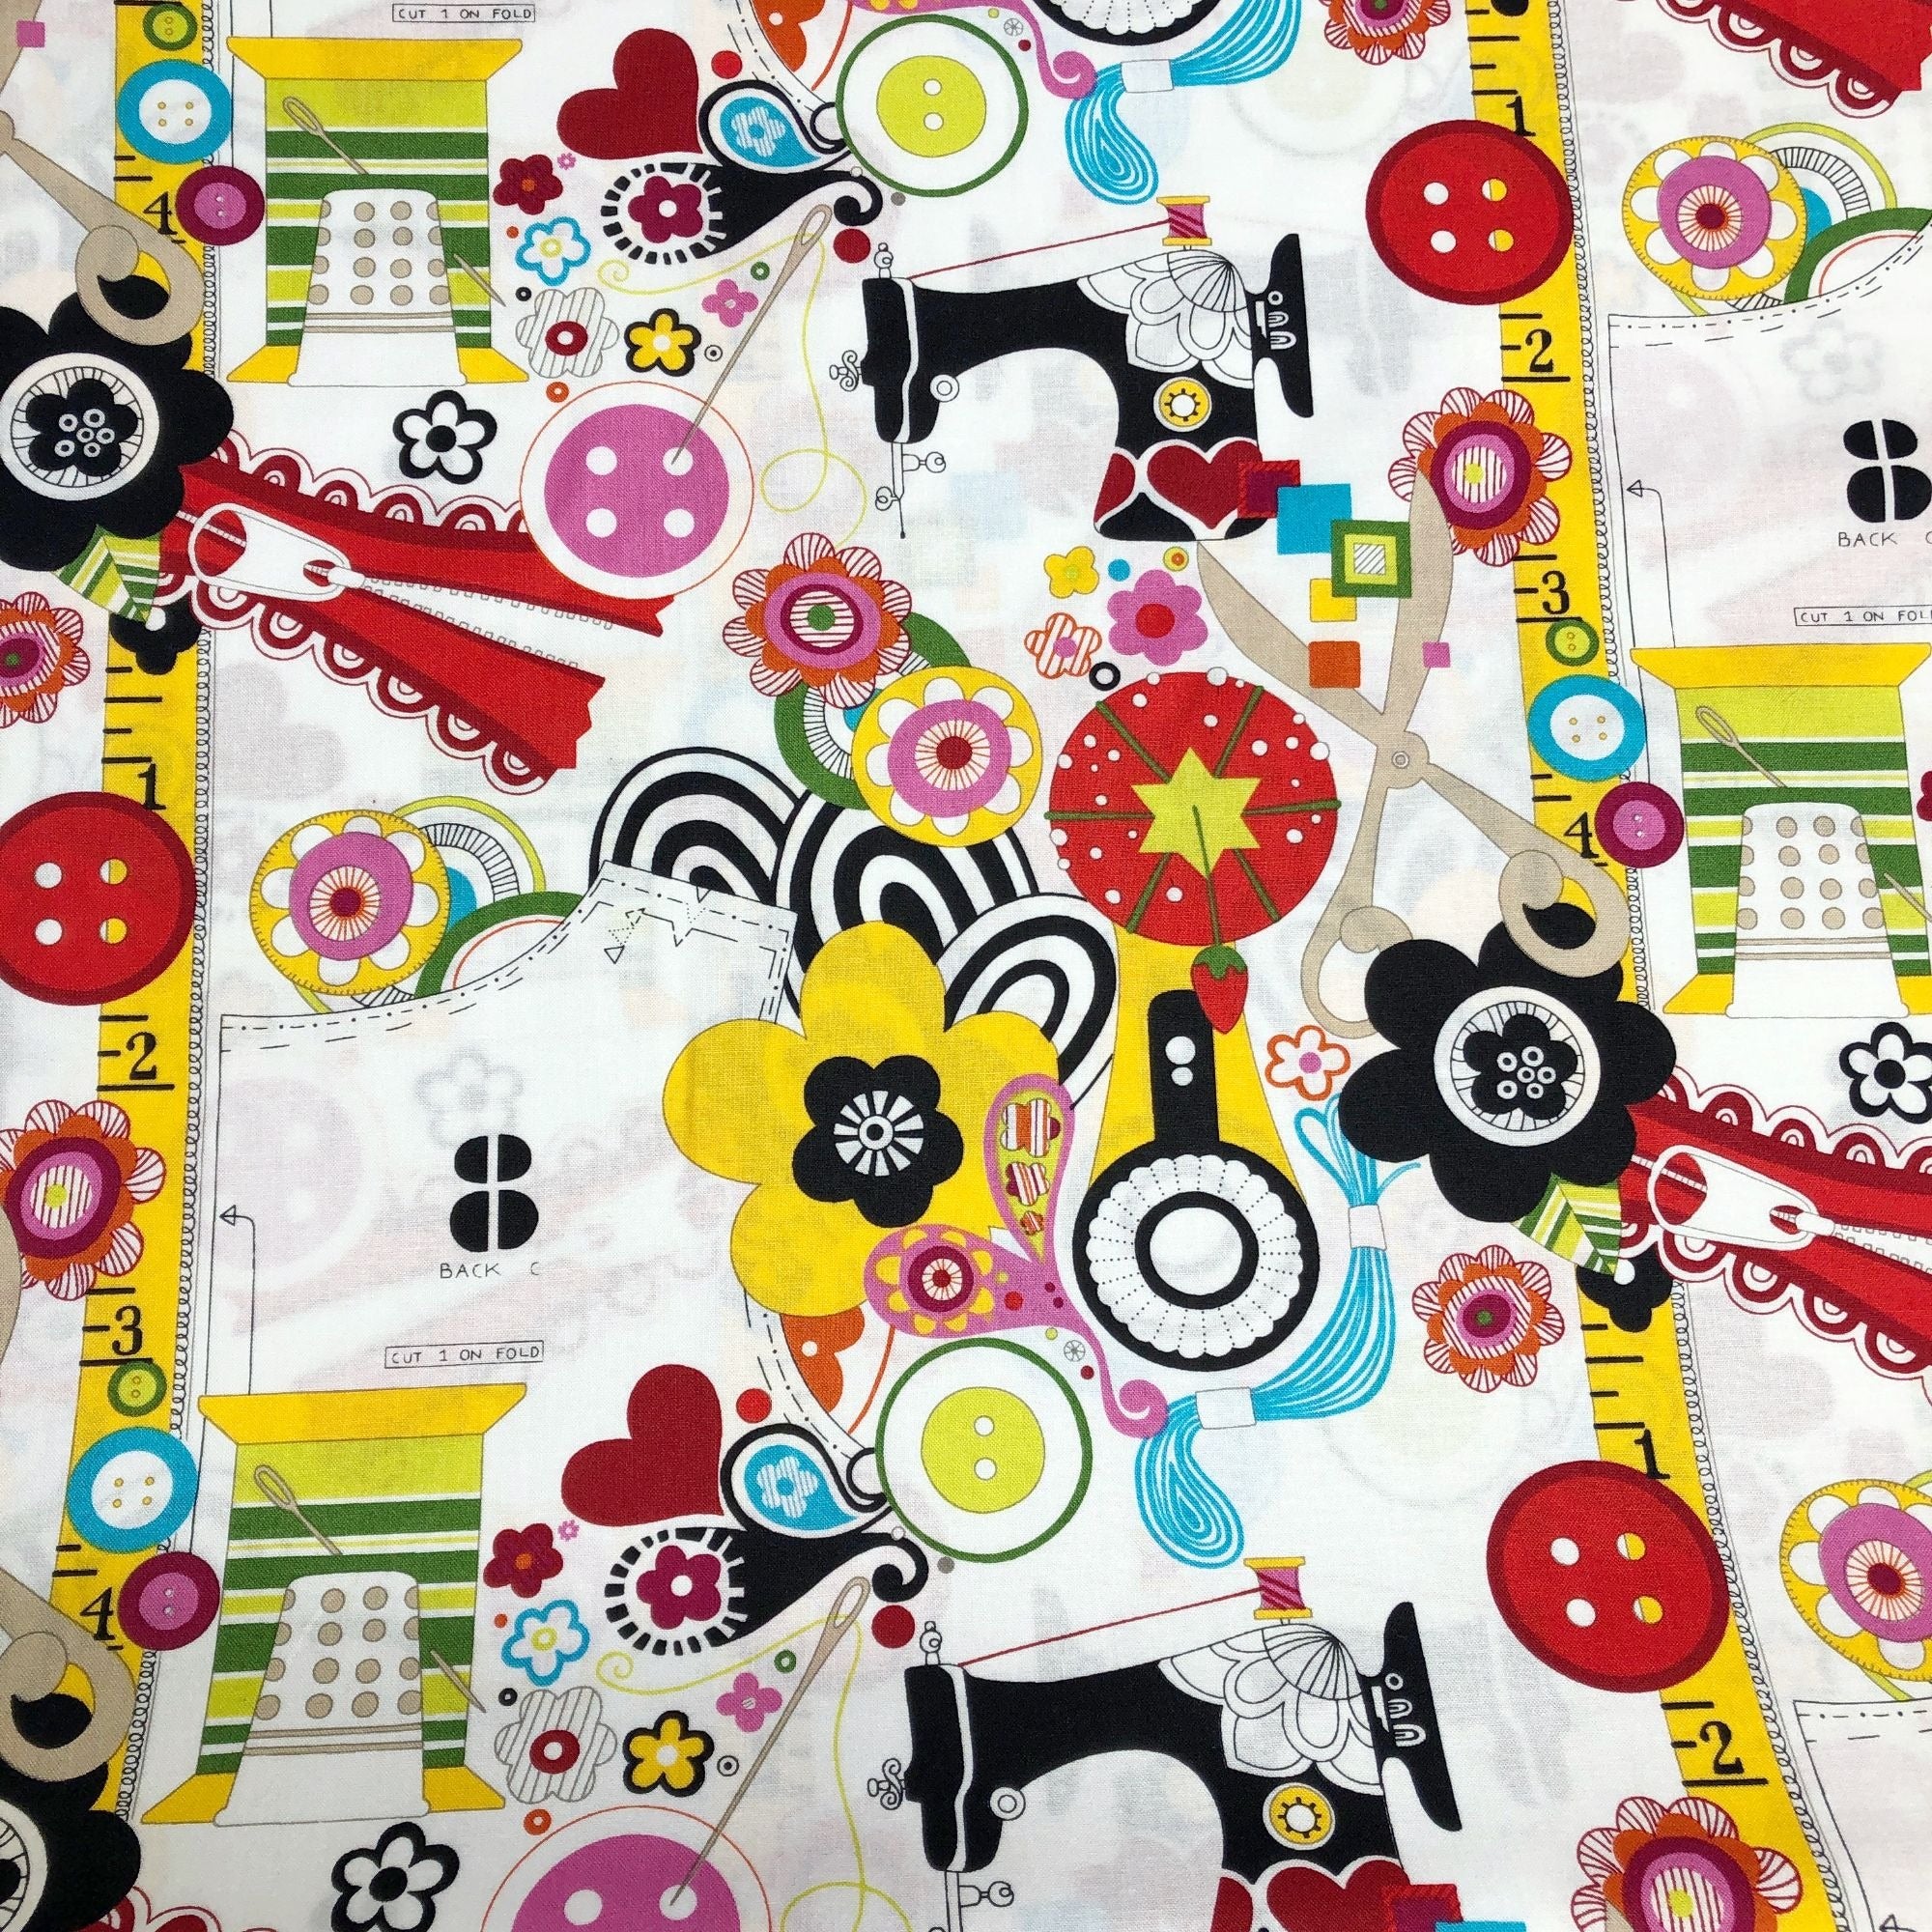 sewing themed fabric